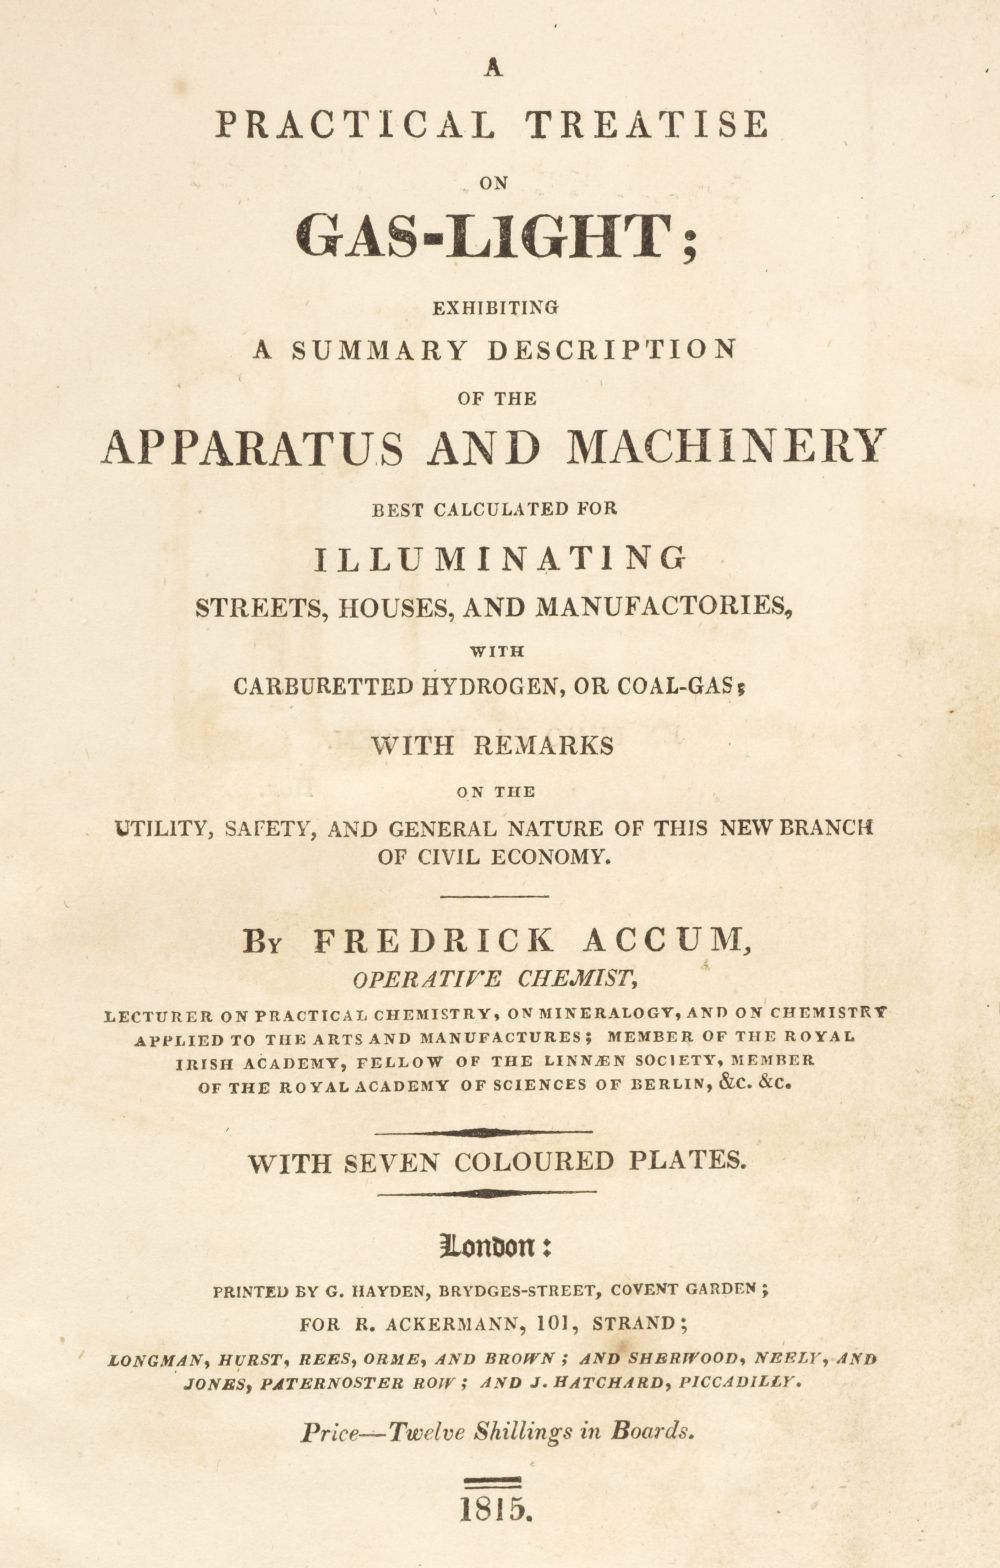 Accum (Friedrich). A Practical Treatise on Gas-Light, 1st edition, 1815, & 3 others